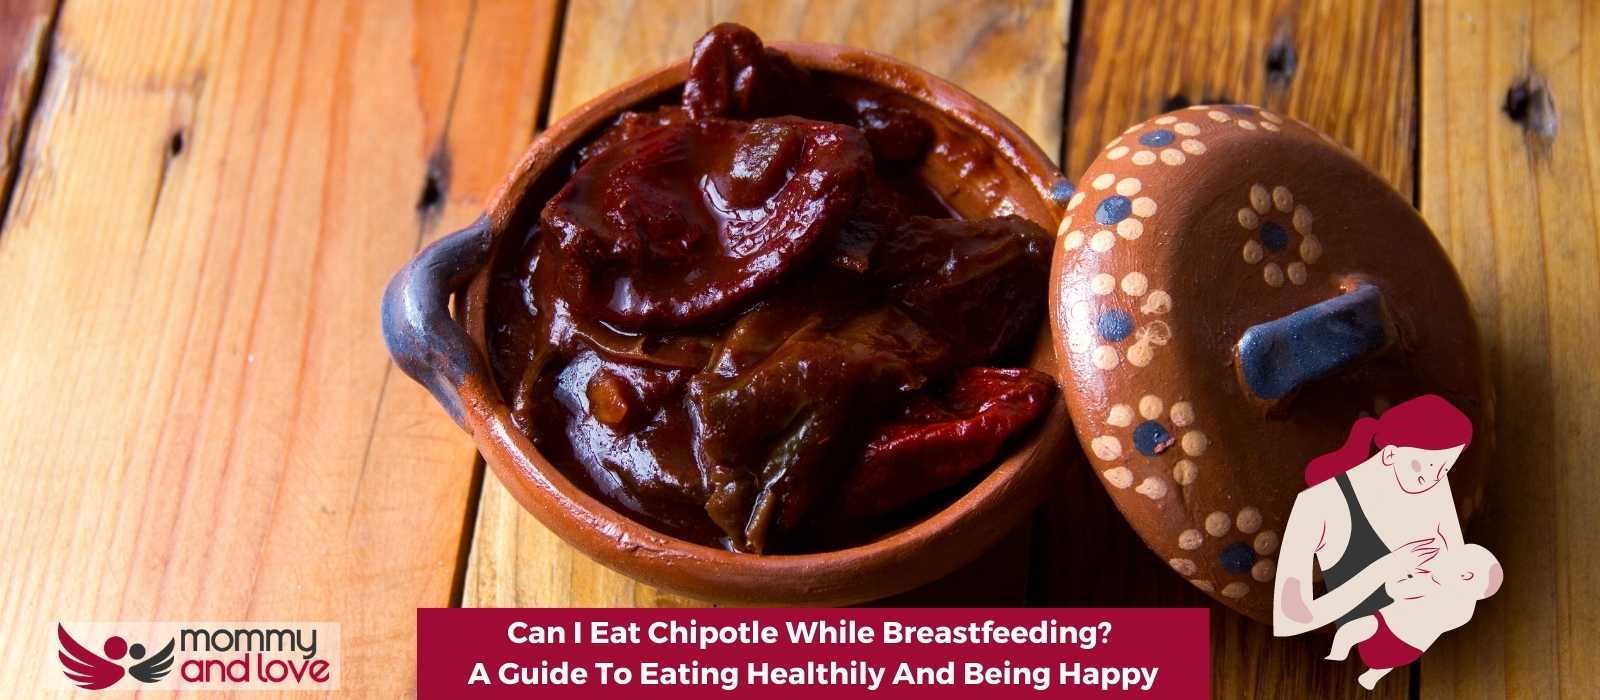 Can I Eat Chipotle While Breastfeeding A Guide To Eating Healthily And Being Happy